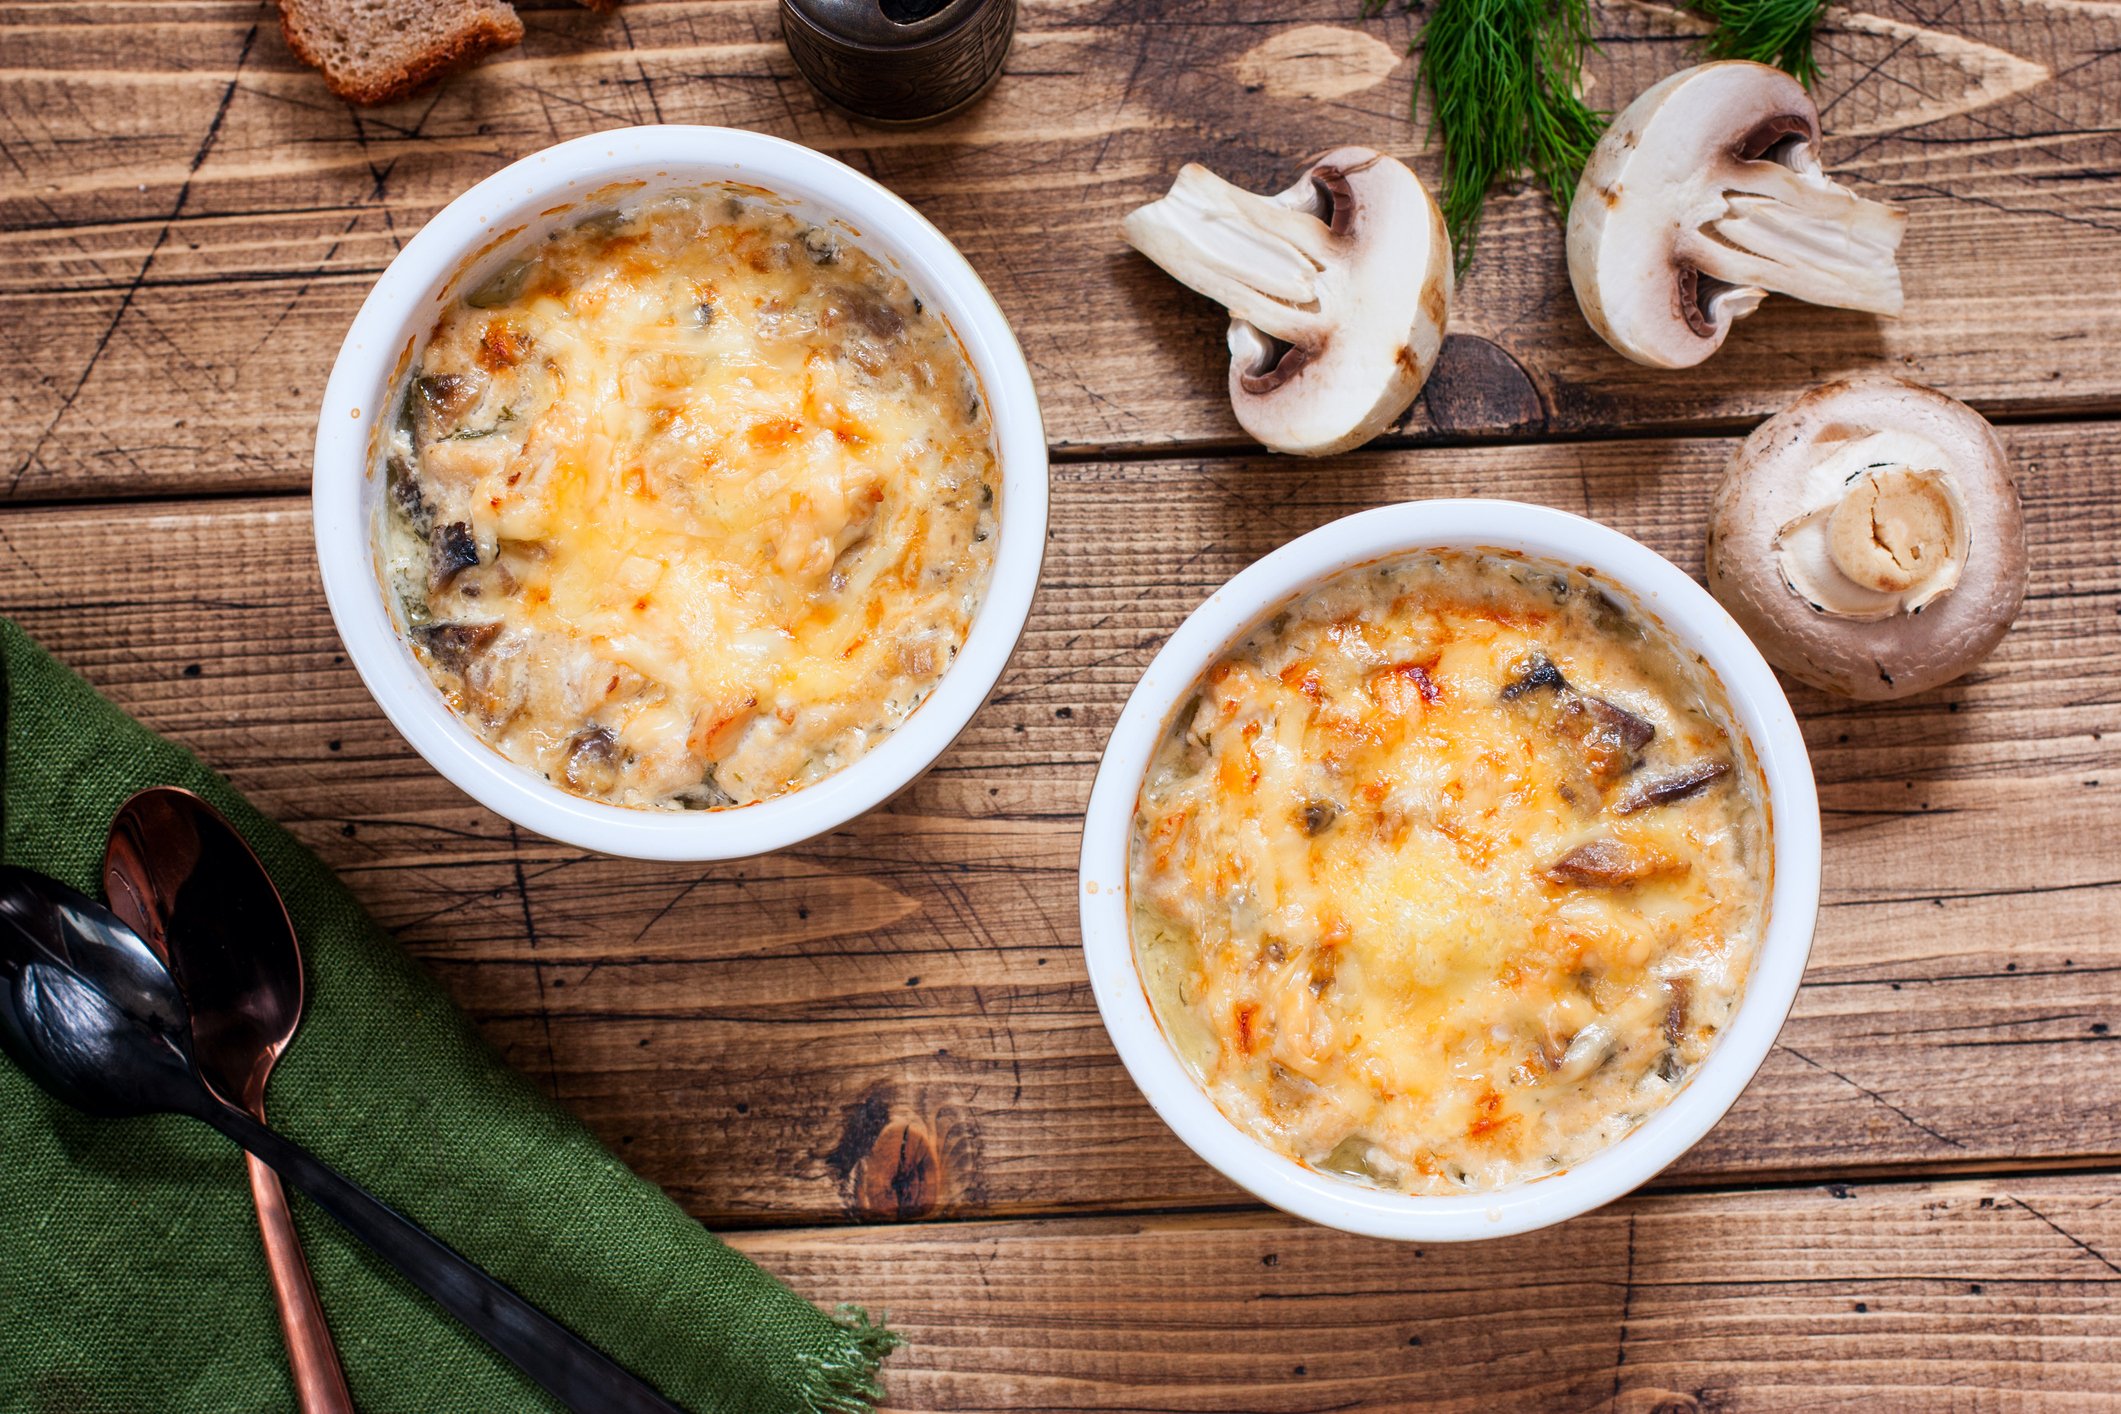 Mushrooms are a great addition to your baked pasta dish for a dose of veggies and substance. (iStock Photo)